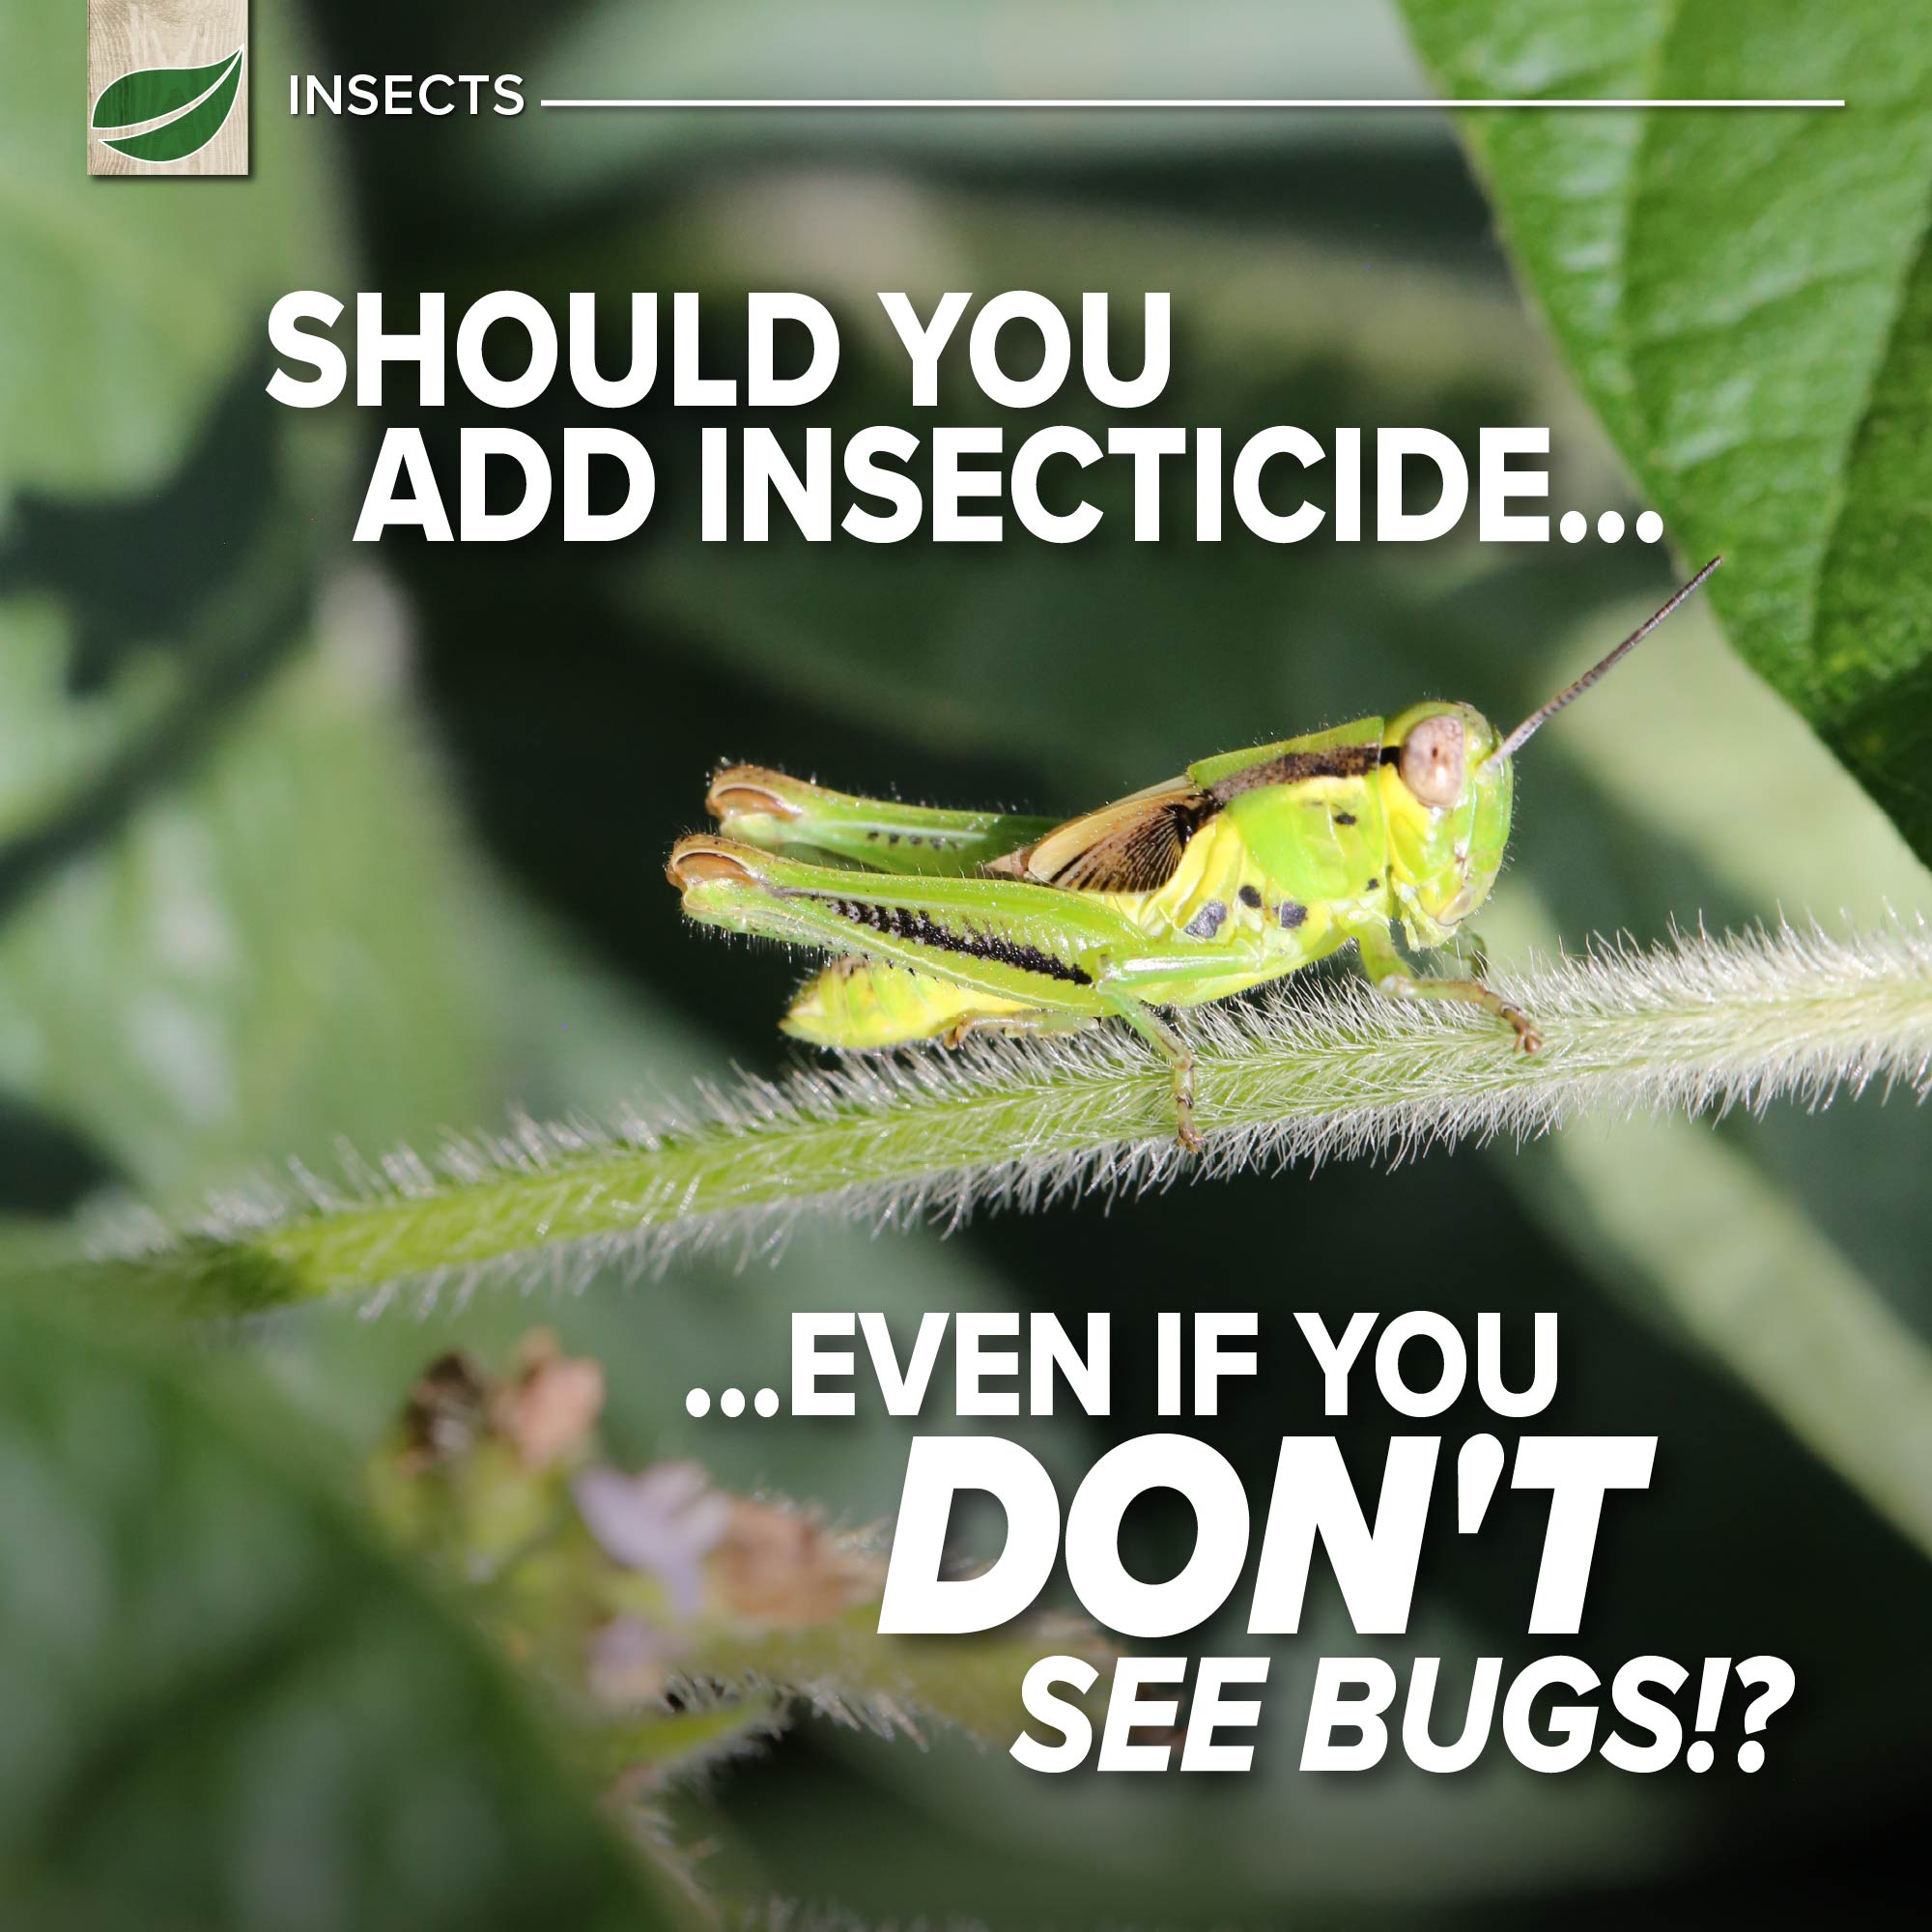 Should You Add Insecticide... Even If You Don't See Bugs?